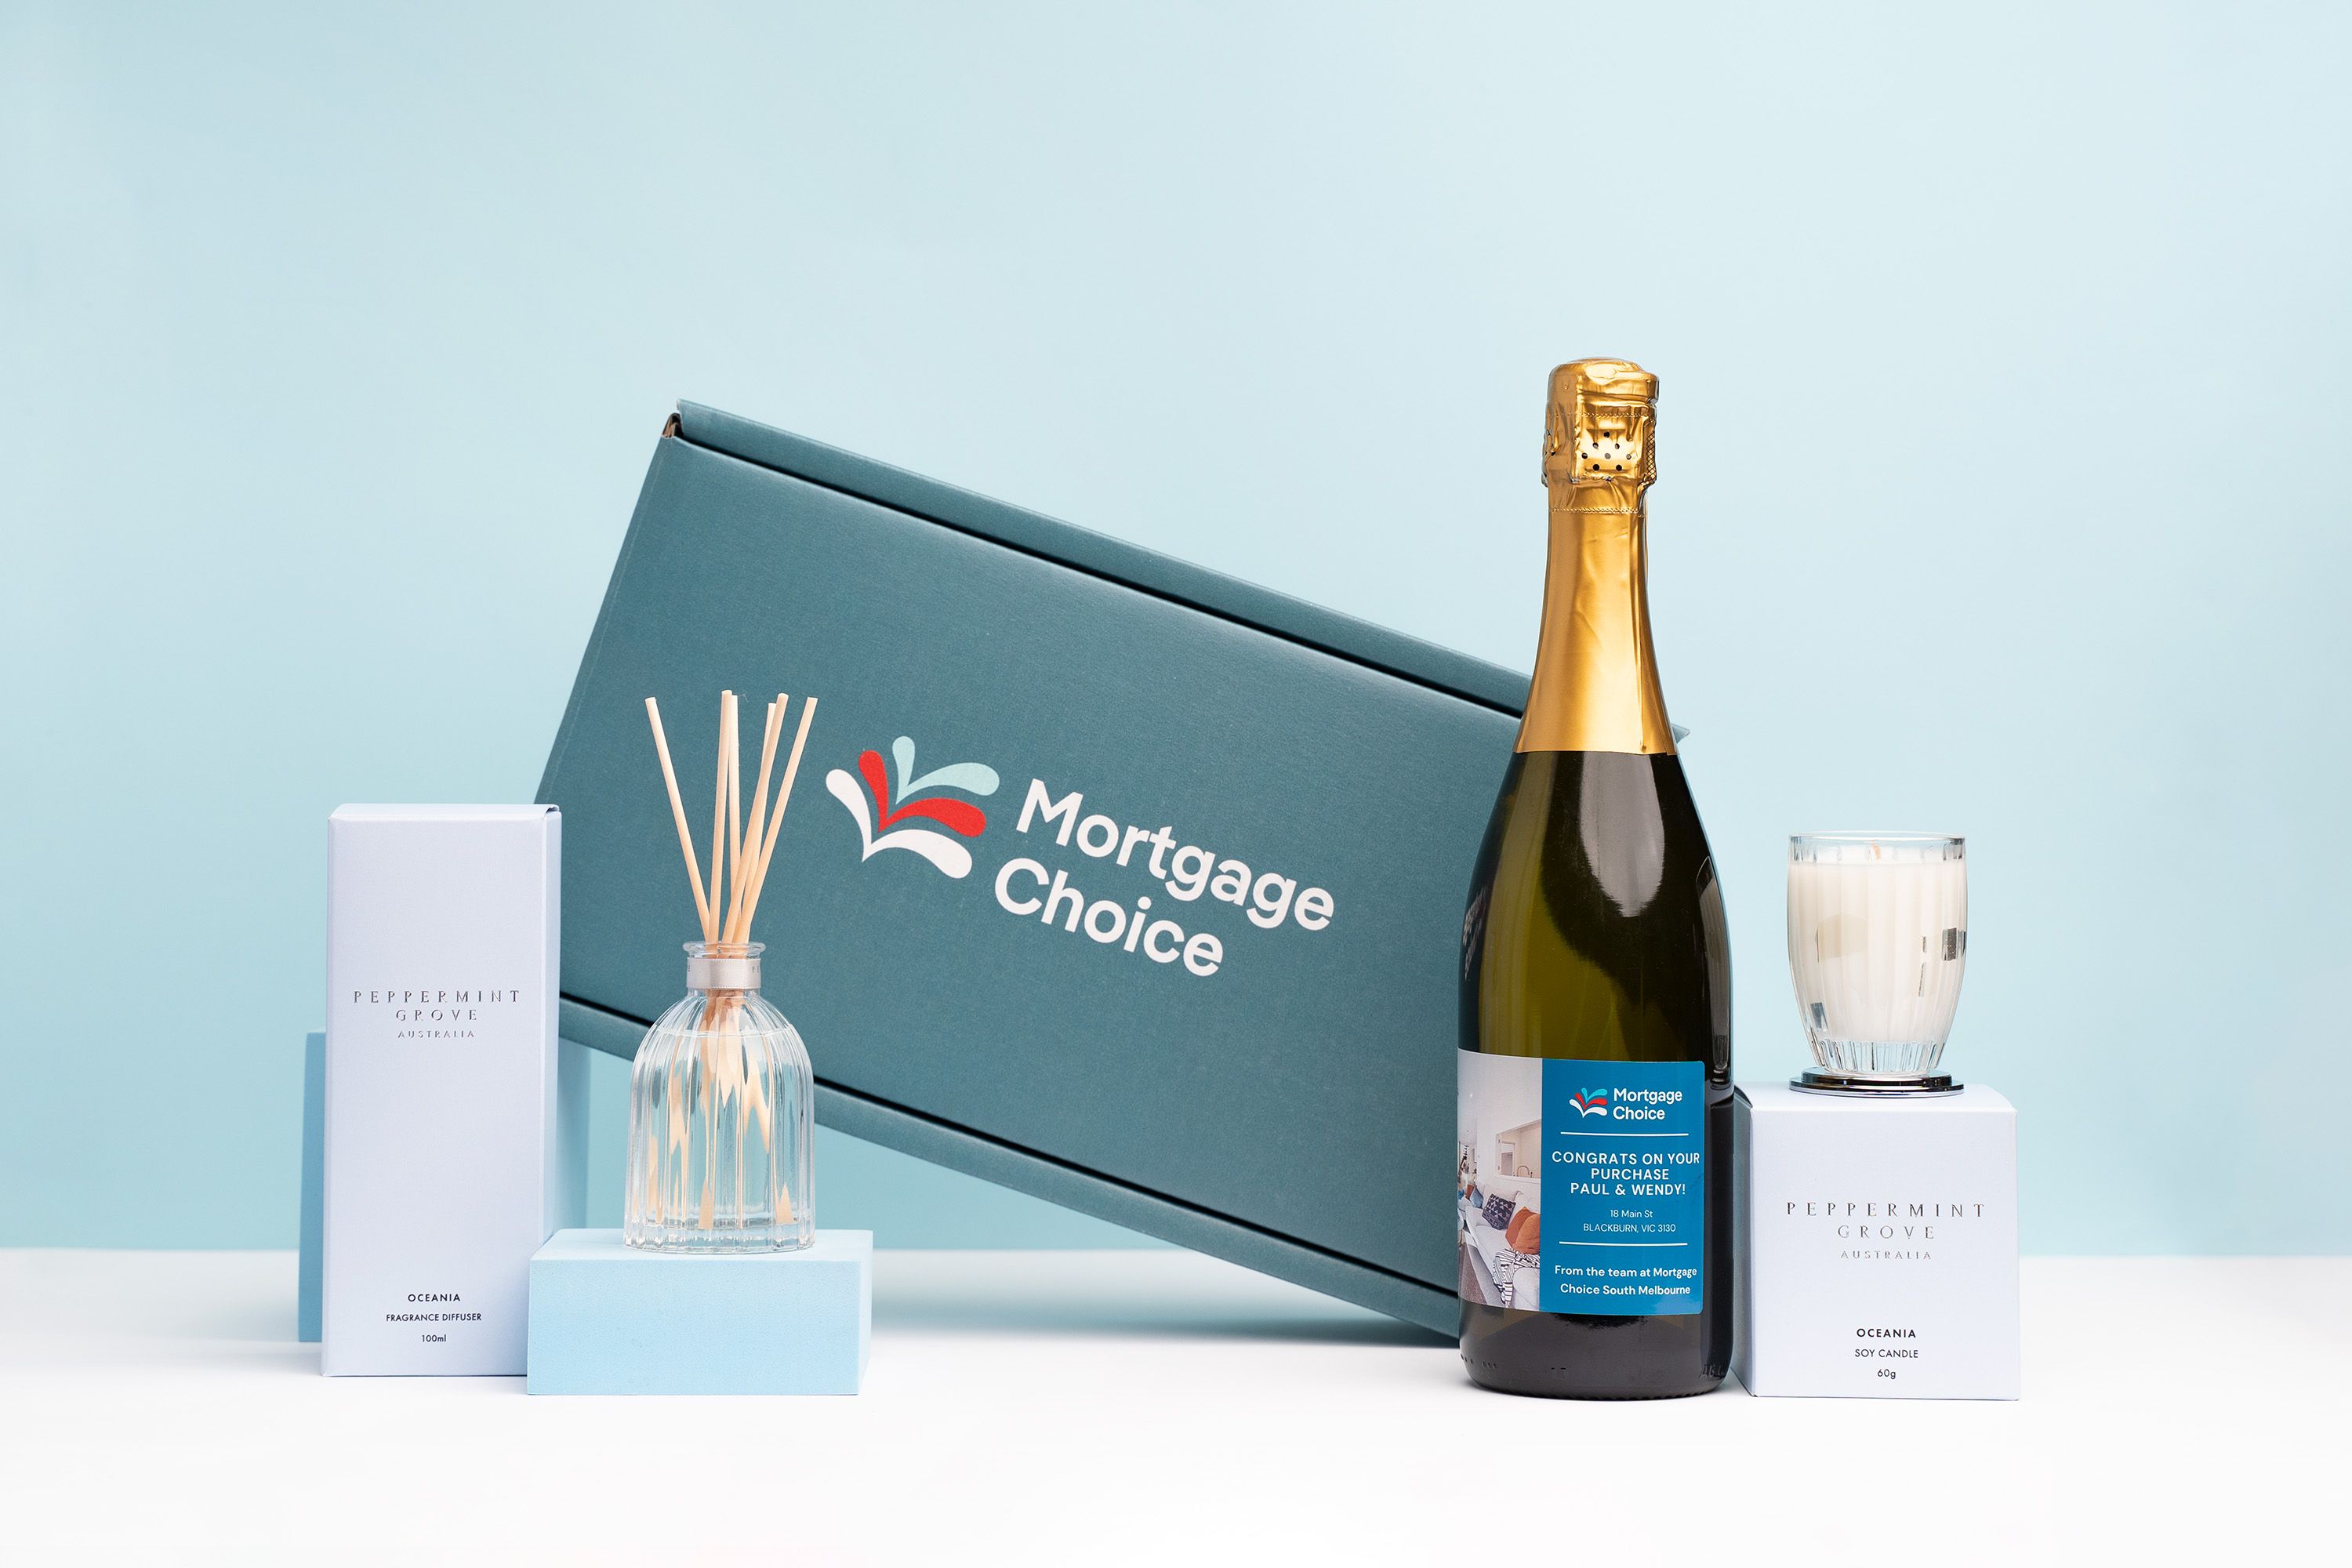 personalised bottle of wine with mortgage choice add-ons